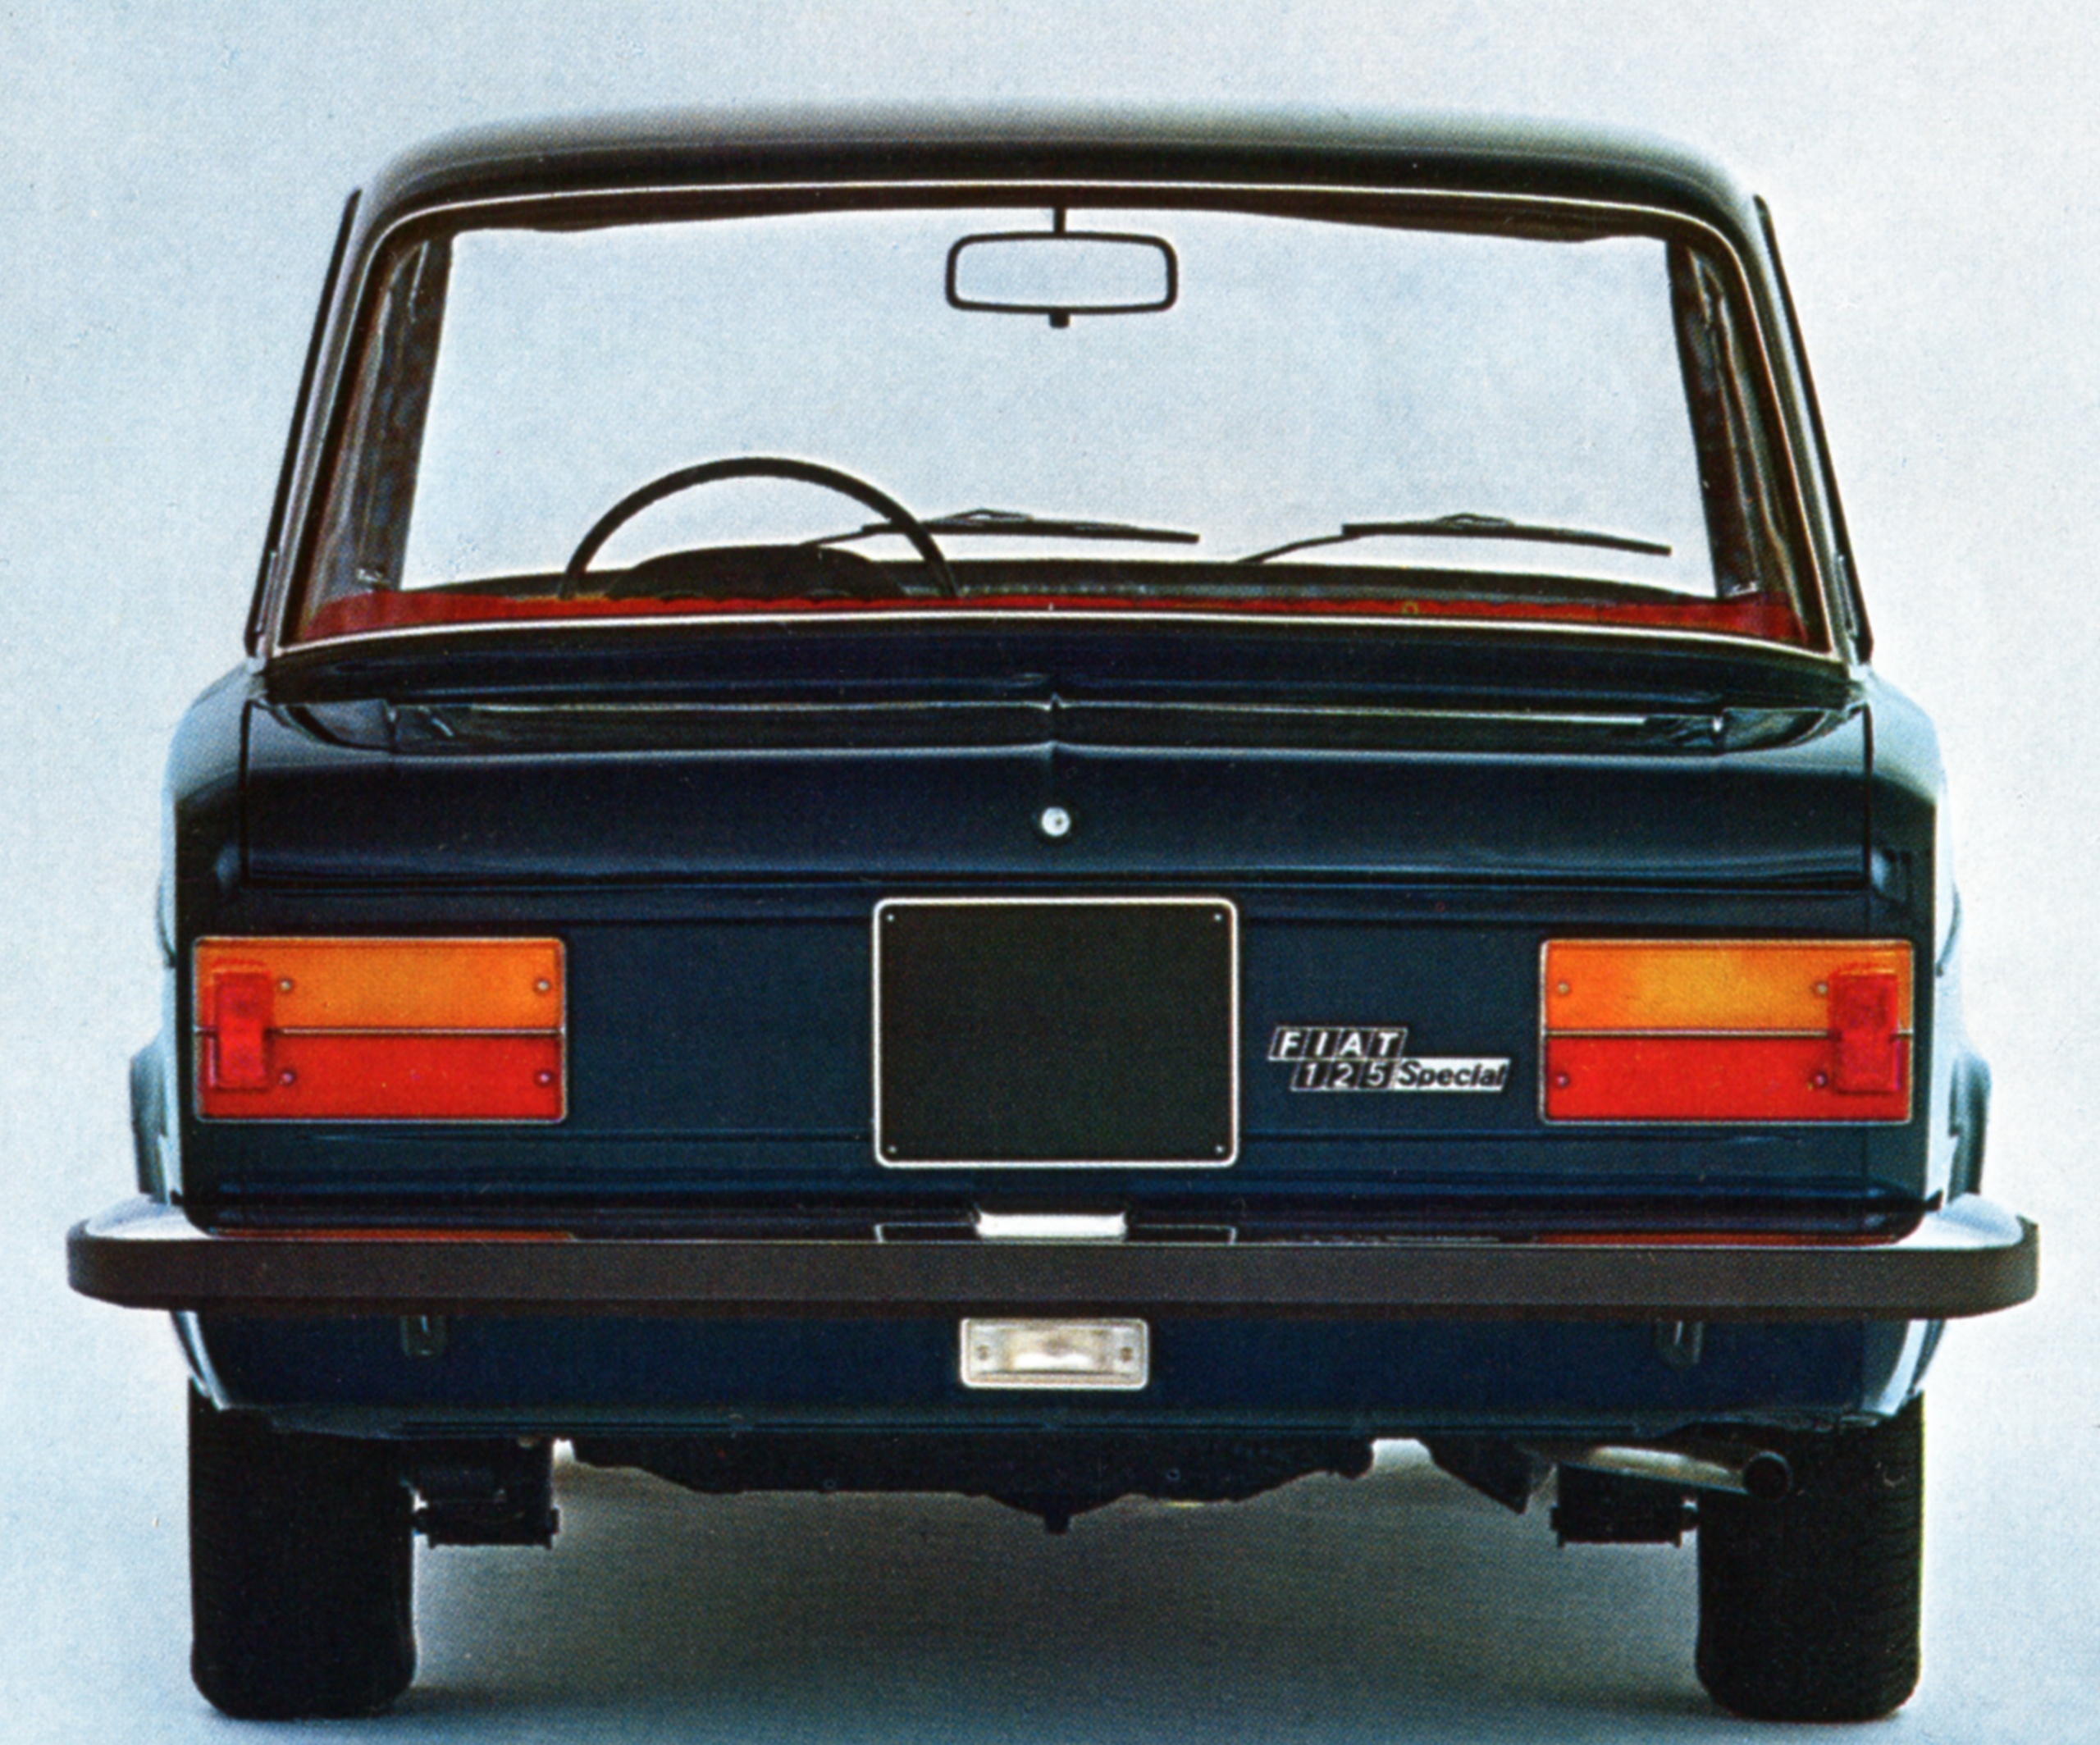 FIAT 125 Special (from 1971) back view